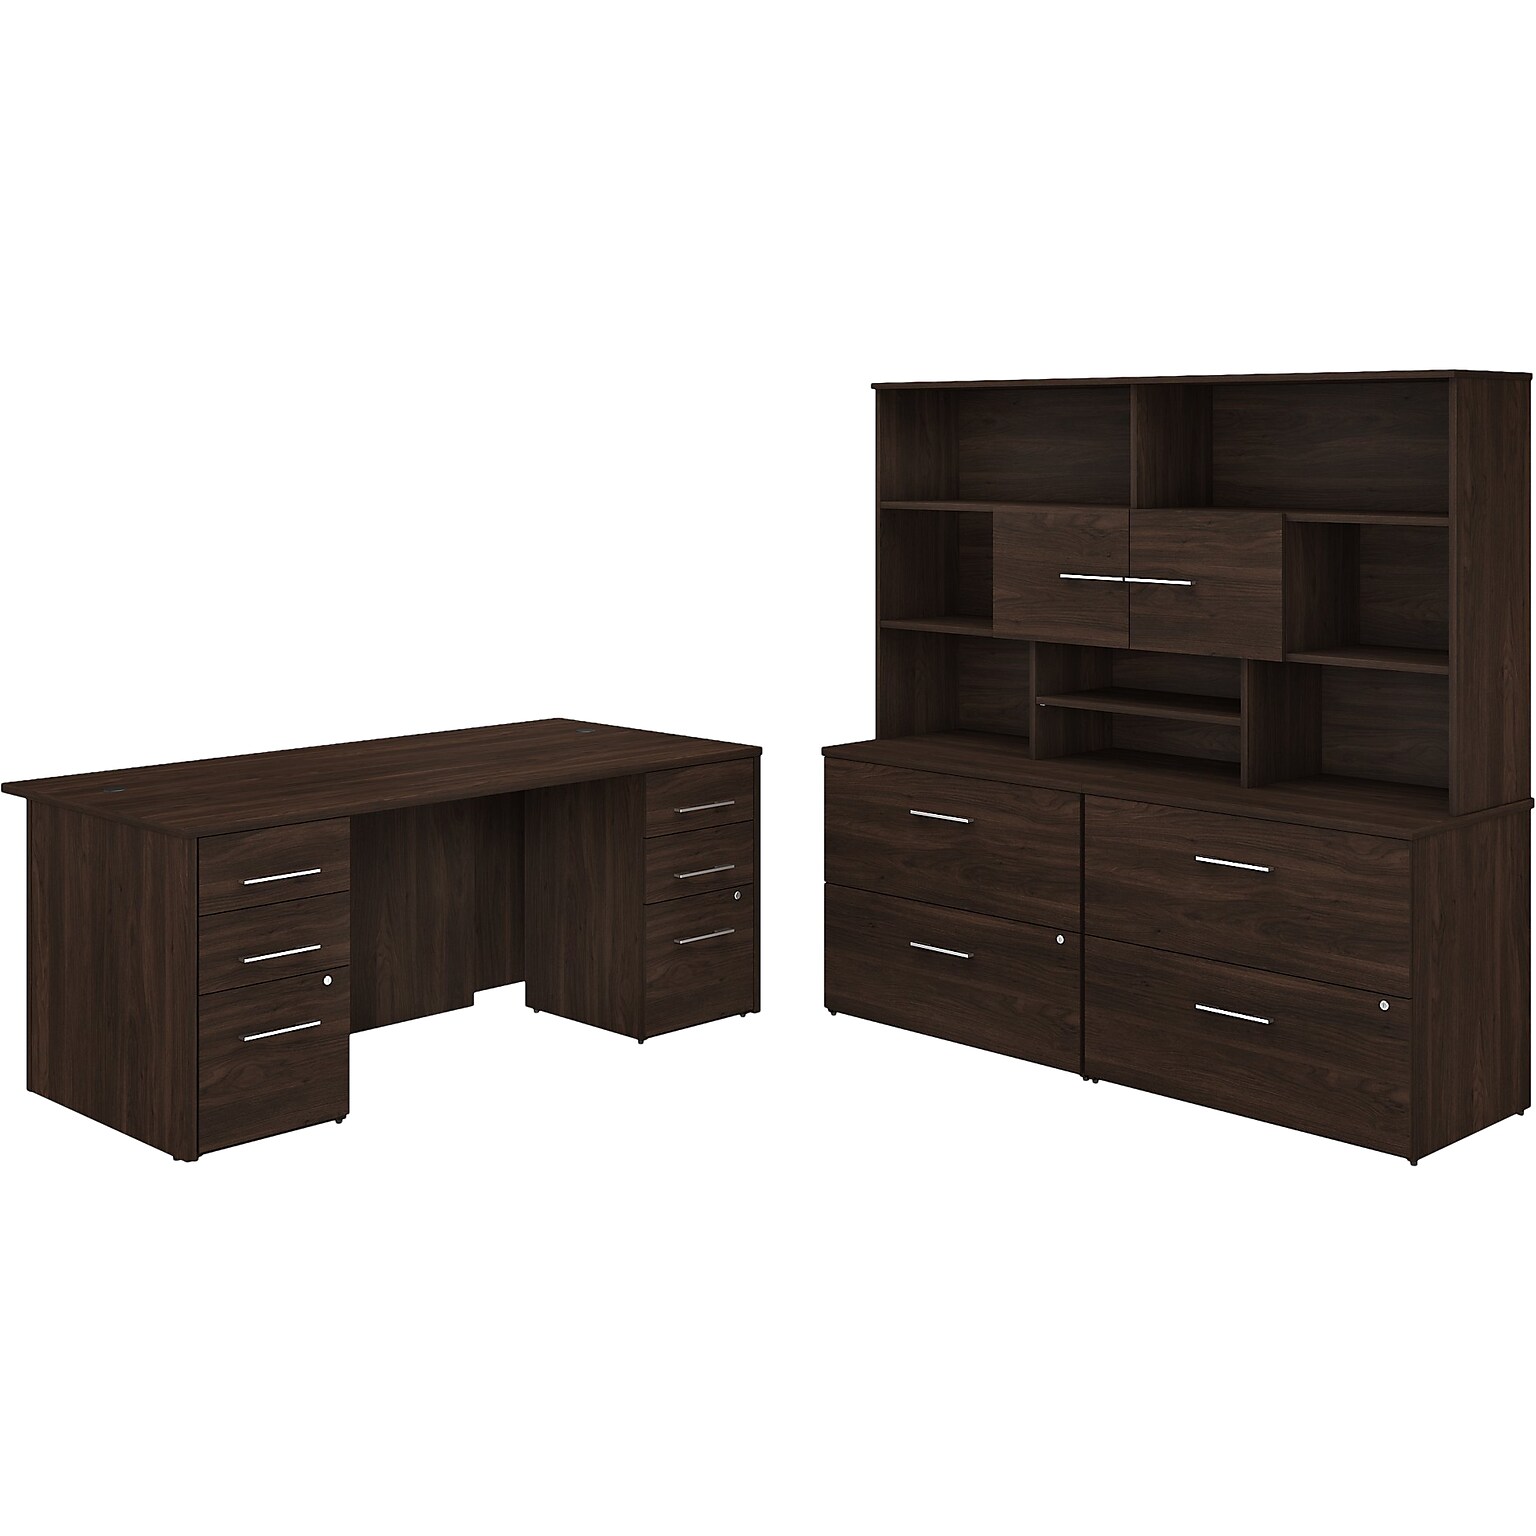 Bush Business Furniture Office 500 72W Executive Desk with Drawers, Lateral File Cabinets and Hutch, Black Walnut (OF5001BWSU)